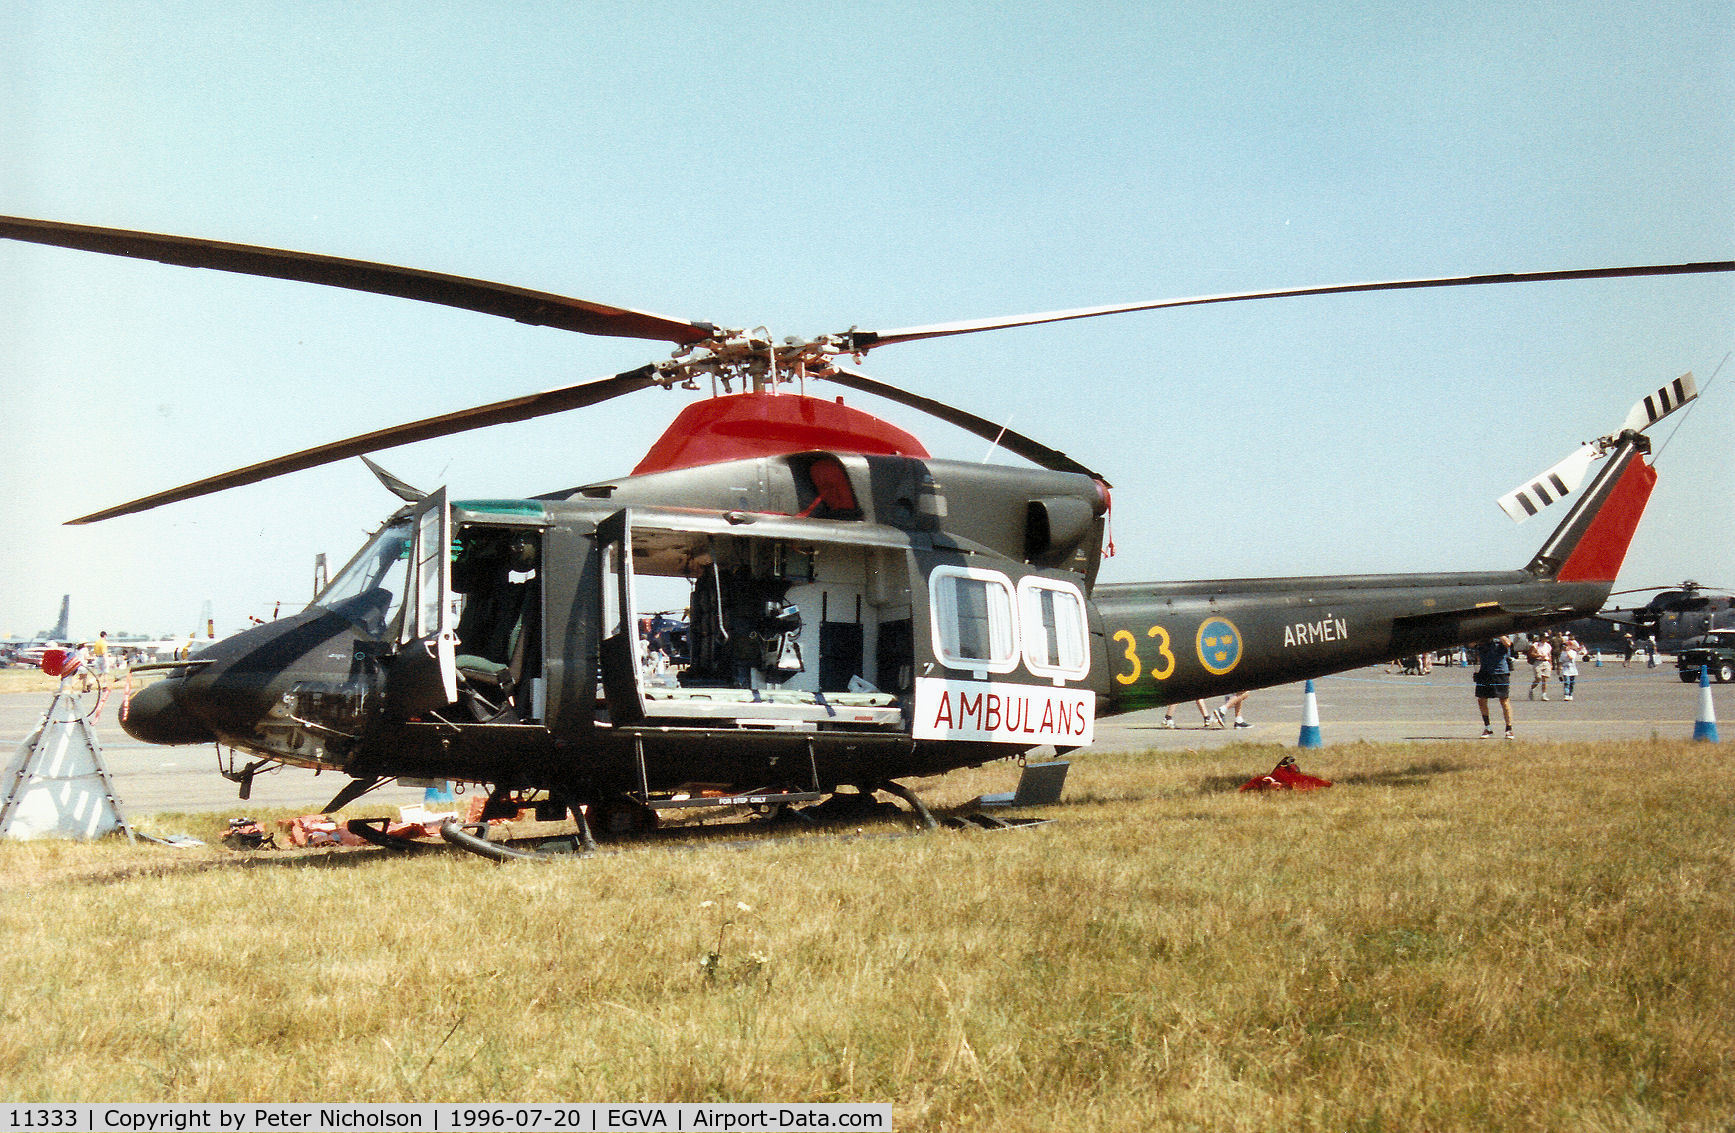 11333, Agusta Hkp11 (AB-412SP) C/N 25803, Hkp.11 of Royal Swedish Army Aviation on display at the 1996 Royal Intnl Air Tattoo at RAF Fairford.